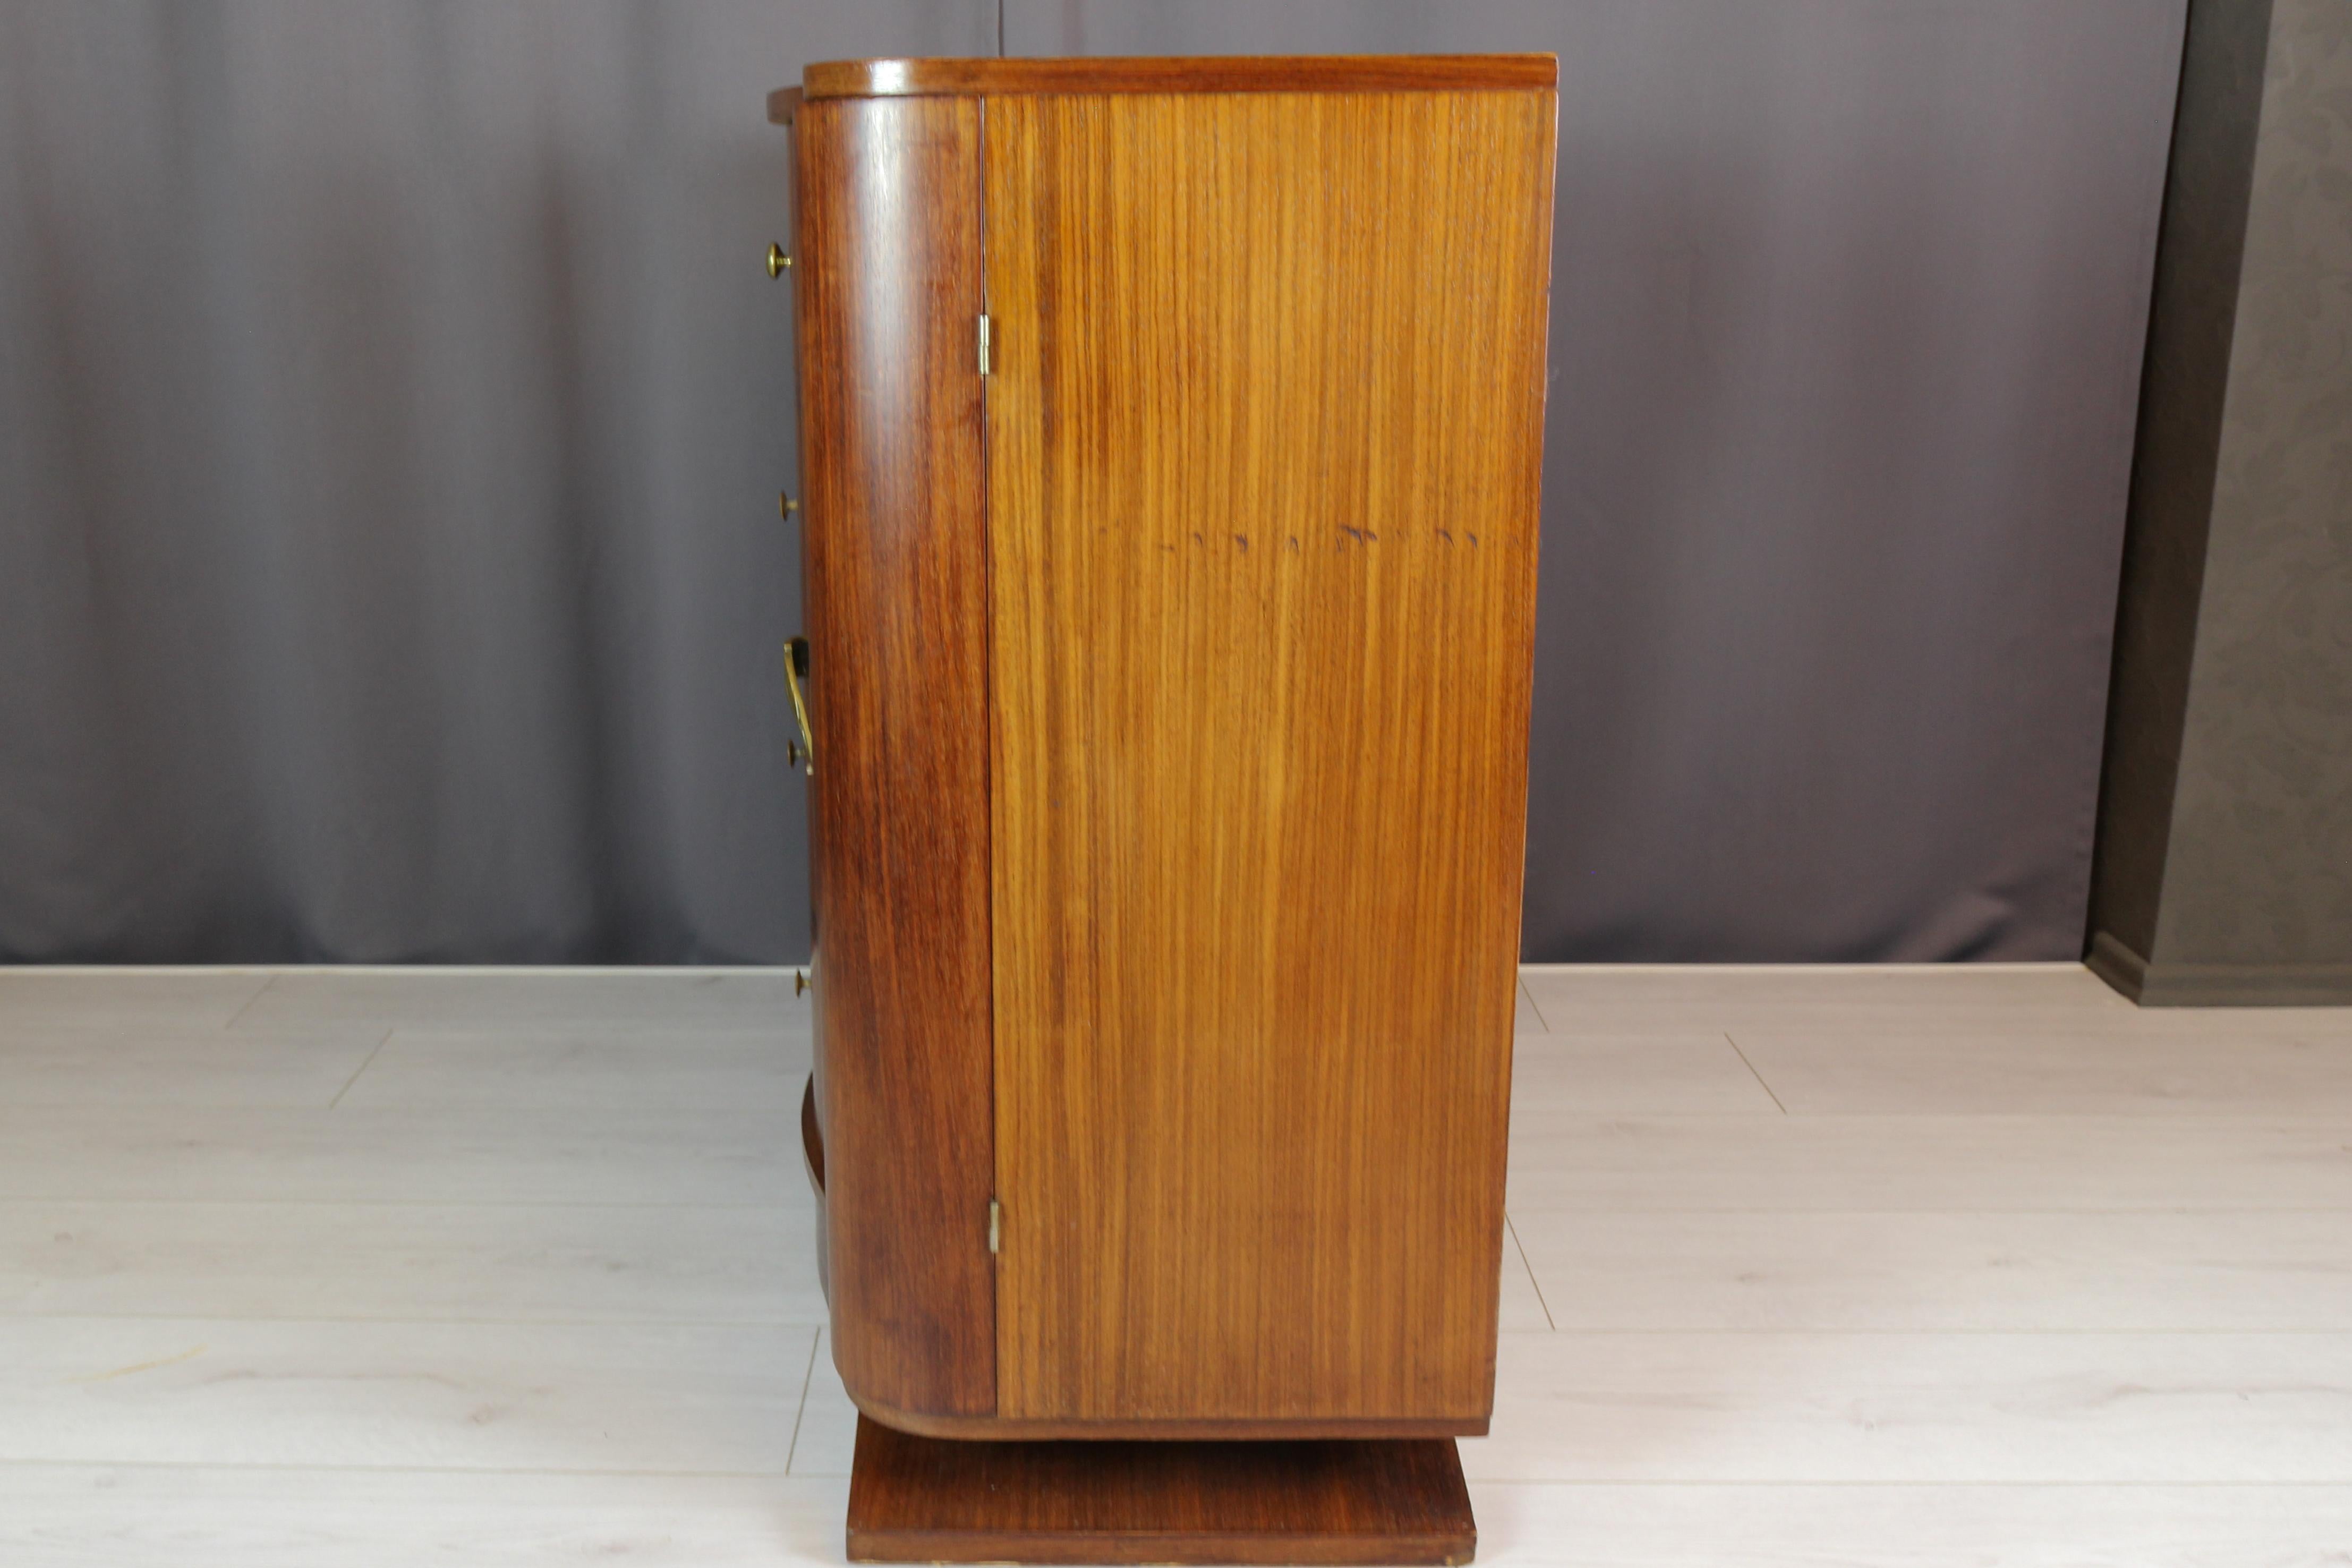 French Art Deco Sideboard with Radio and Record Player, 1930s For Sale 4